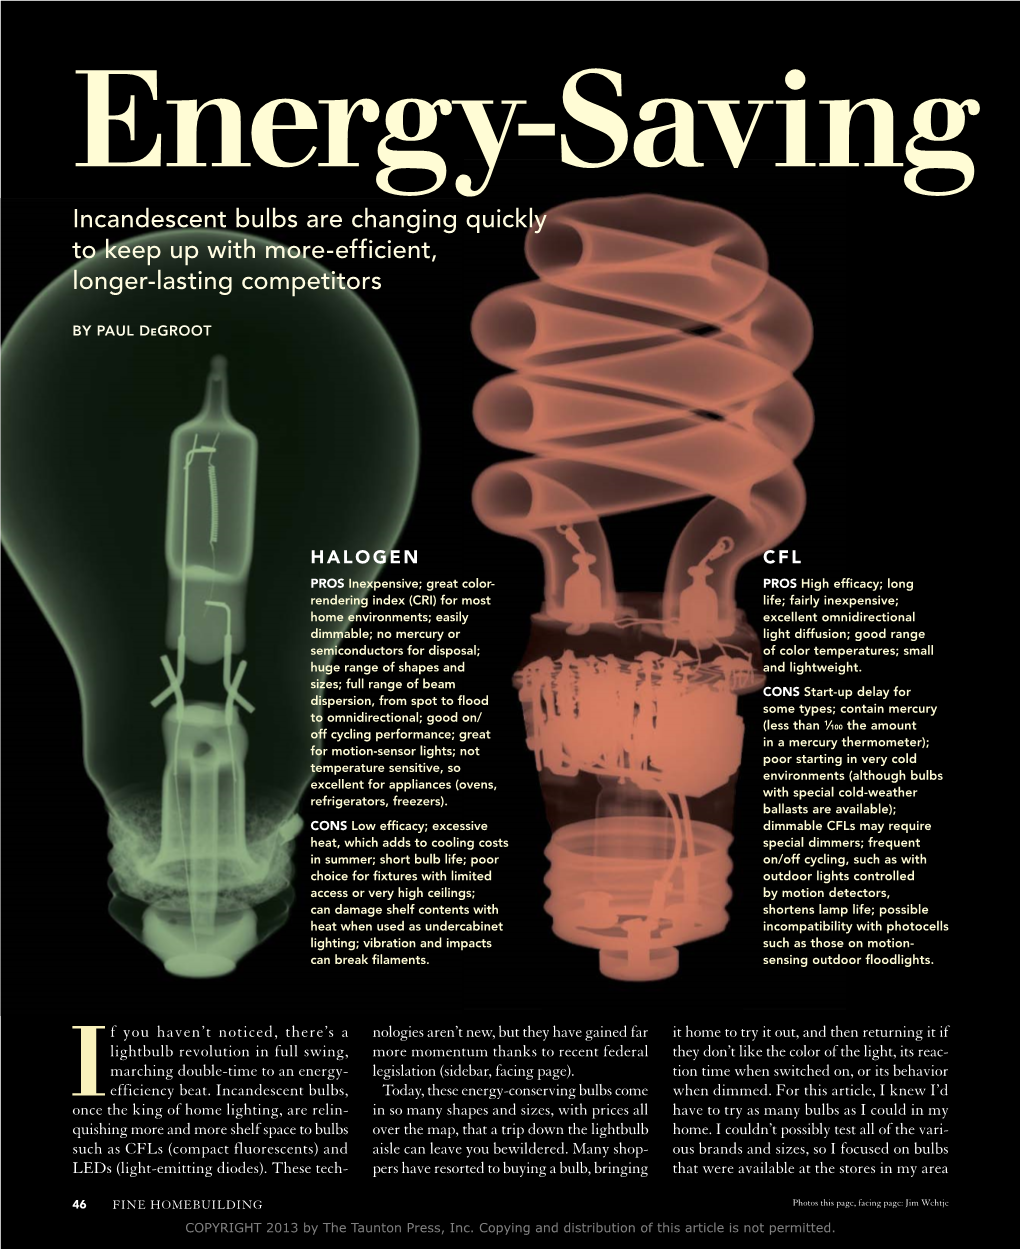 Incandescent Bulbs Are Changing Quickly to Keep up with More-Efficient, Longer-Lasting Competitors